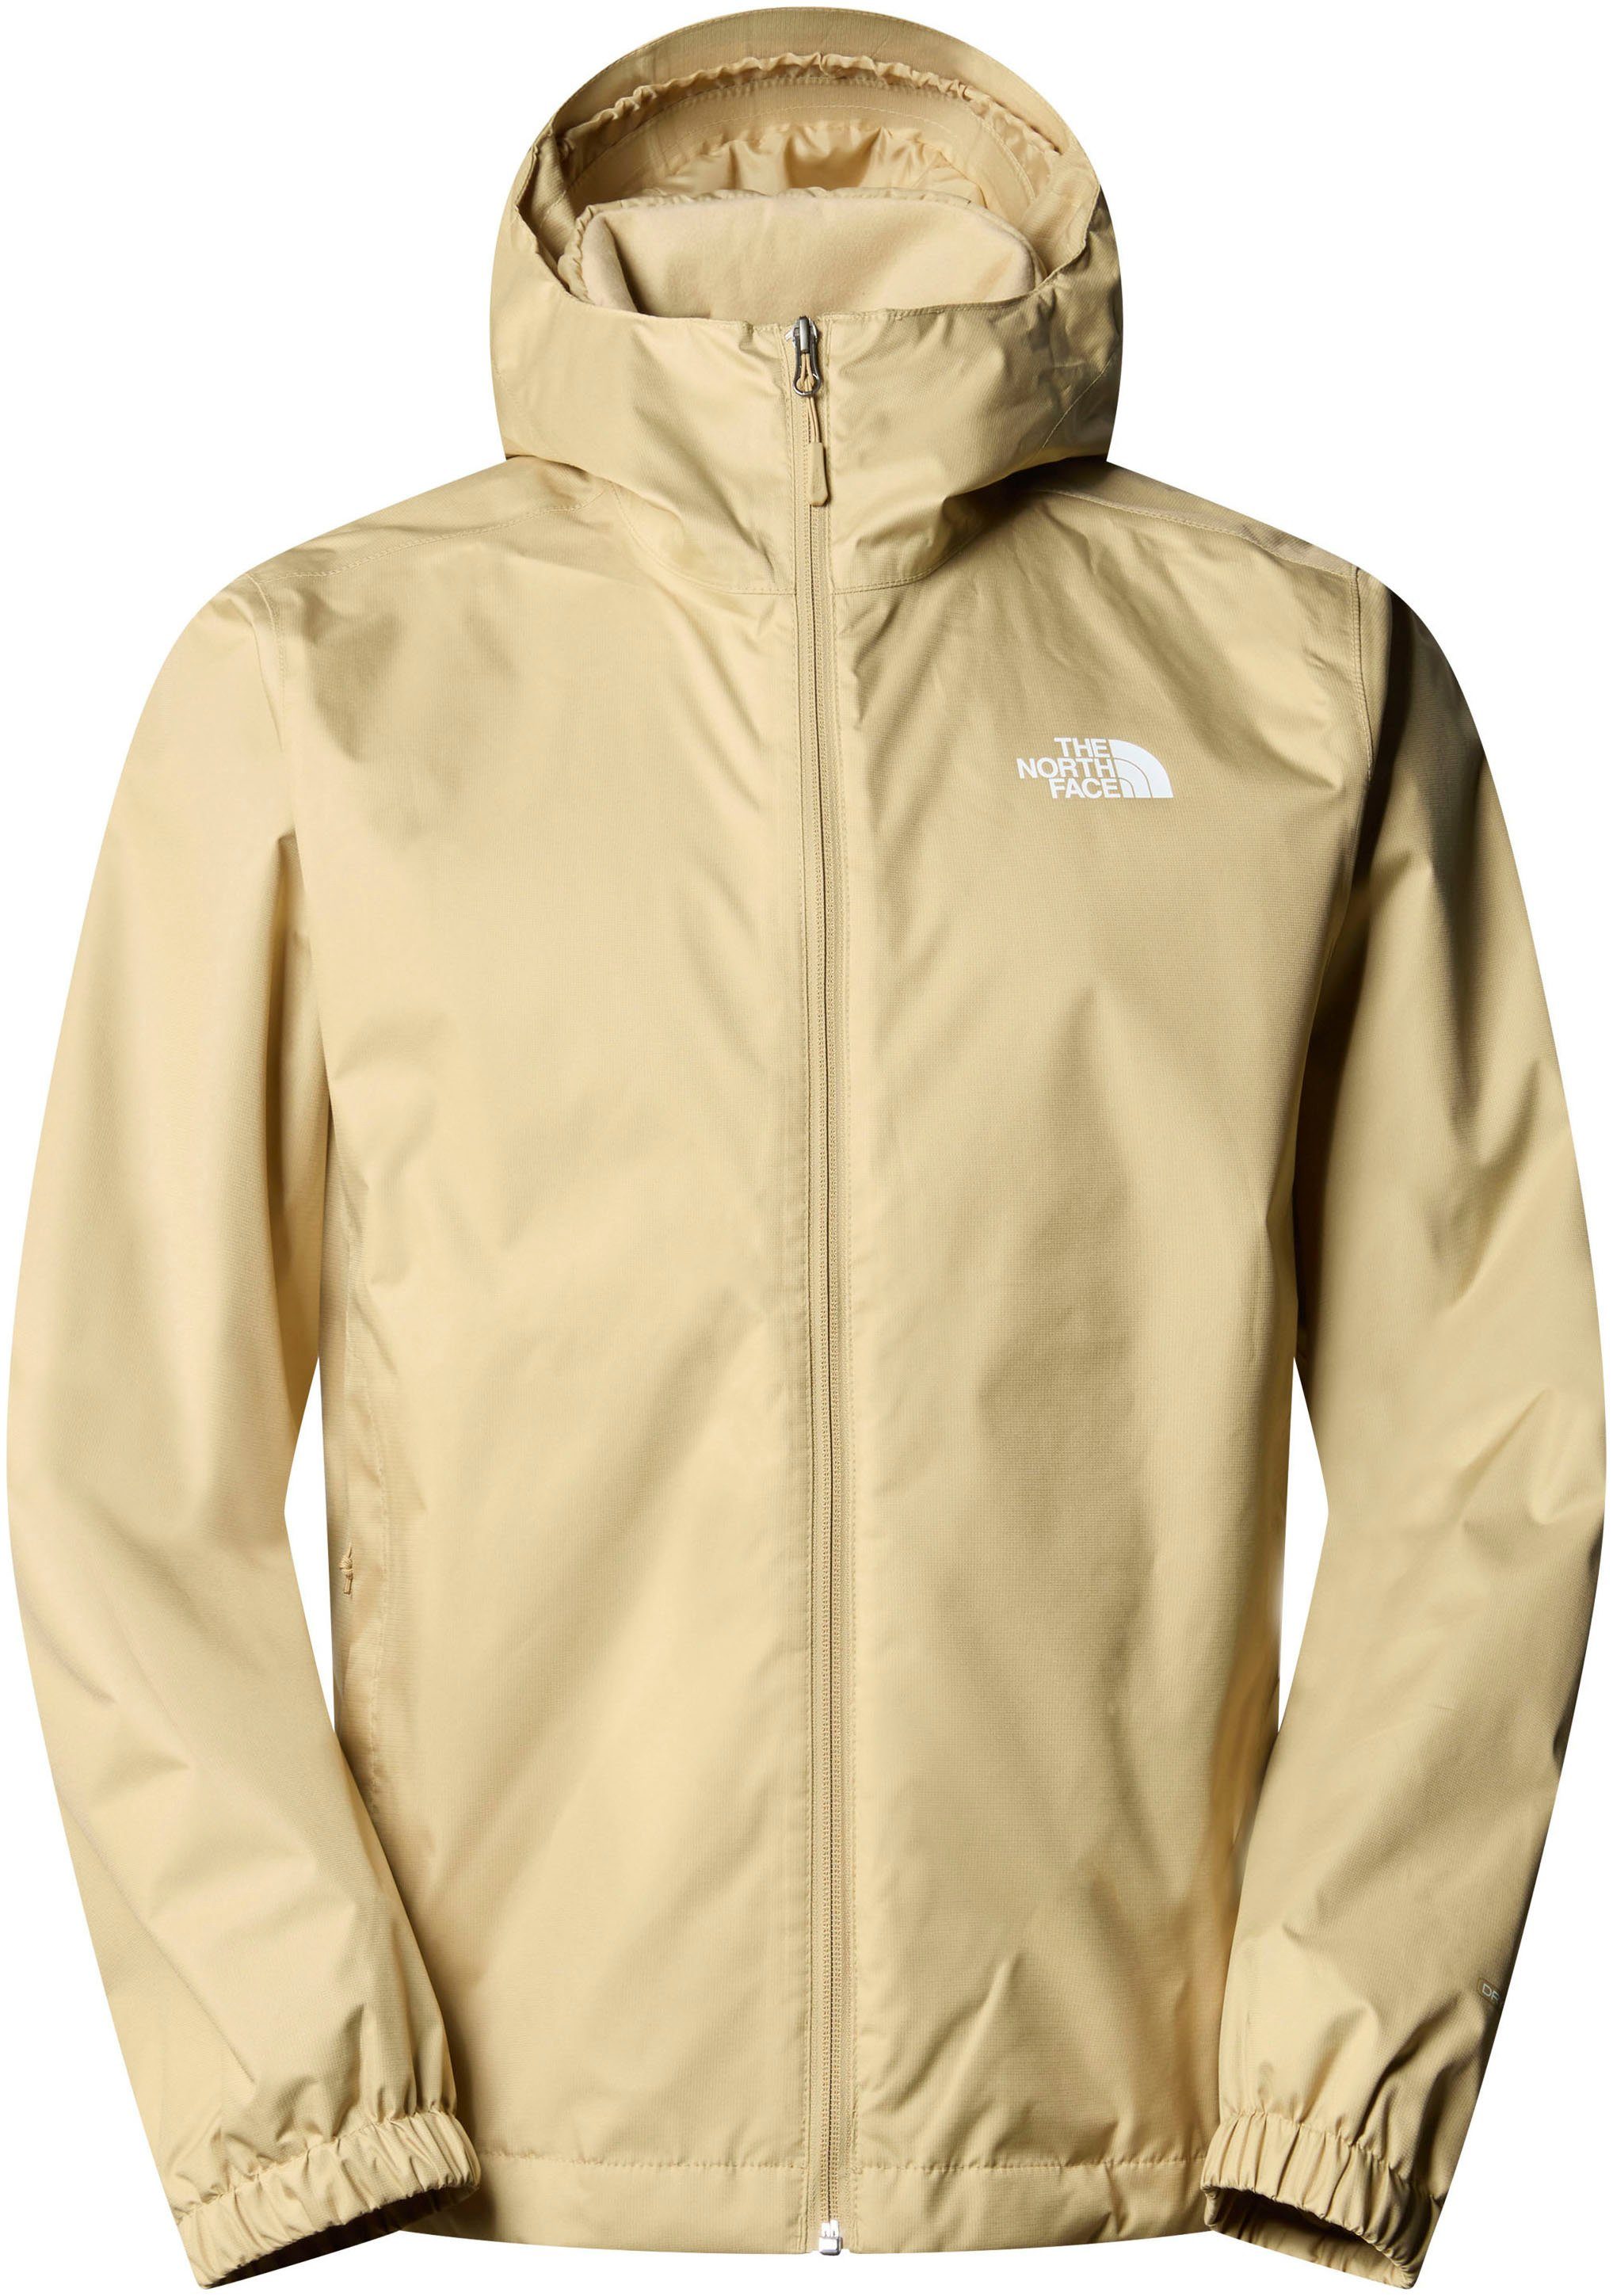 The North Face Funktionsjacke M QUEST JACKET - EU (1-St)